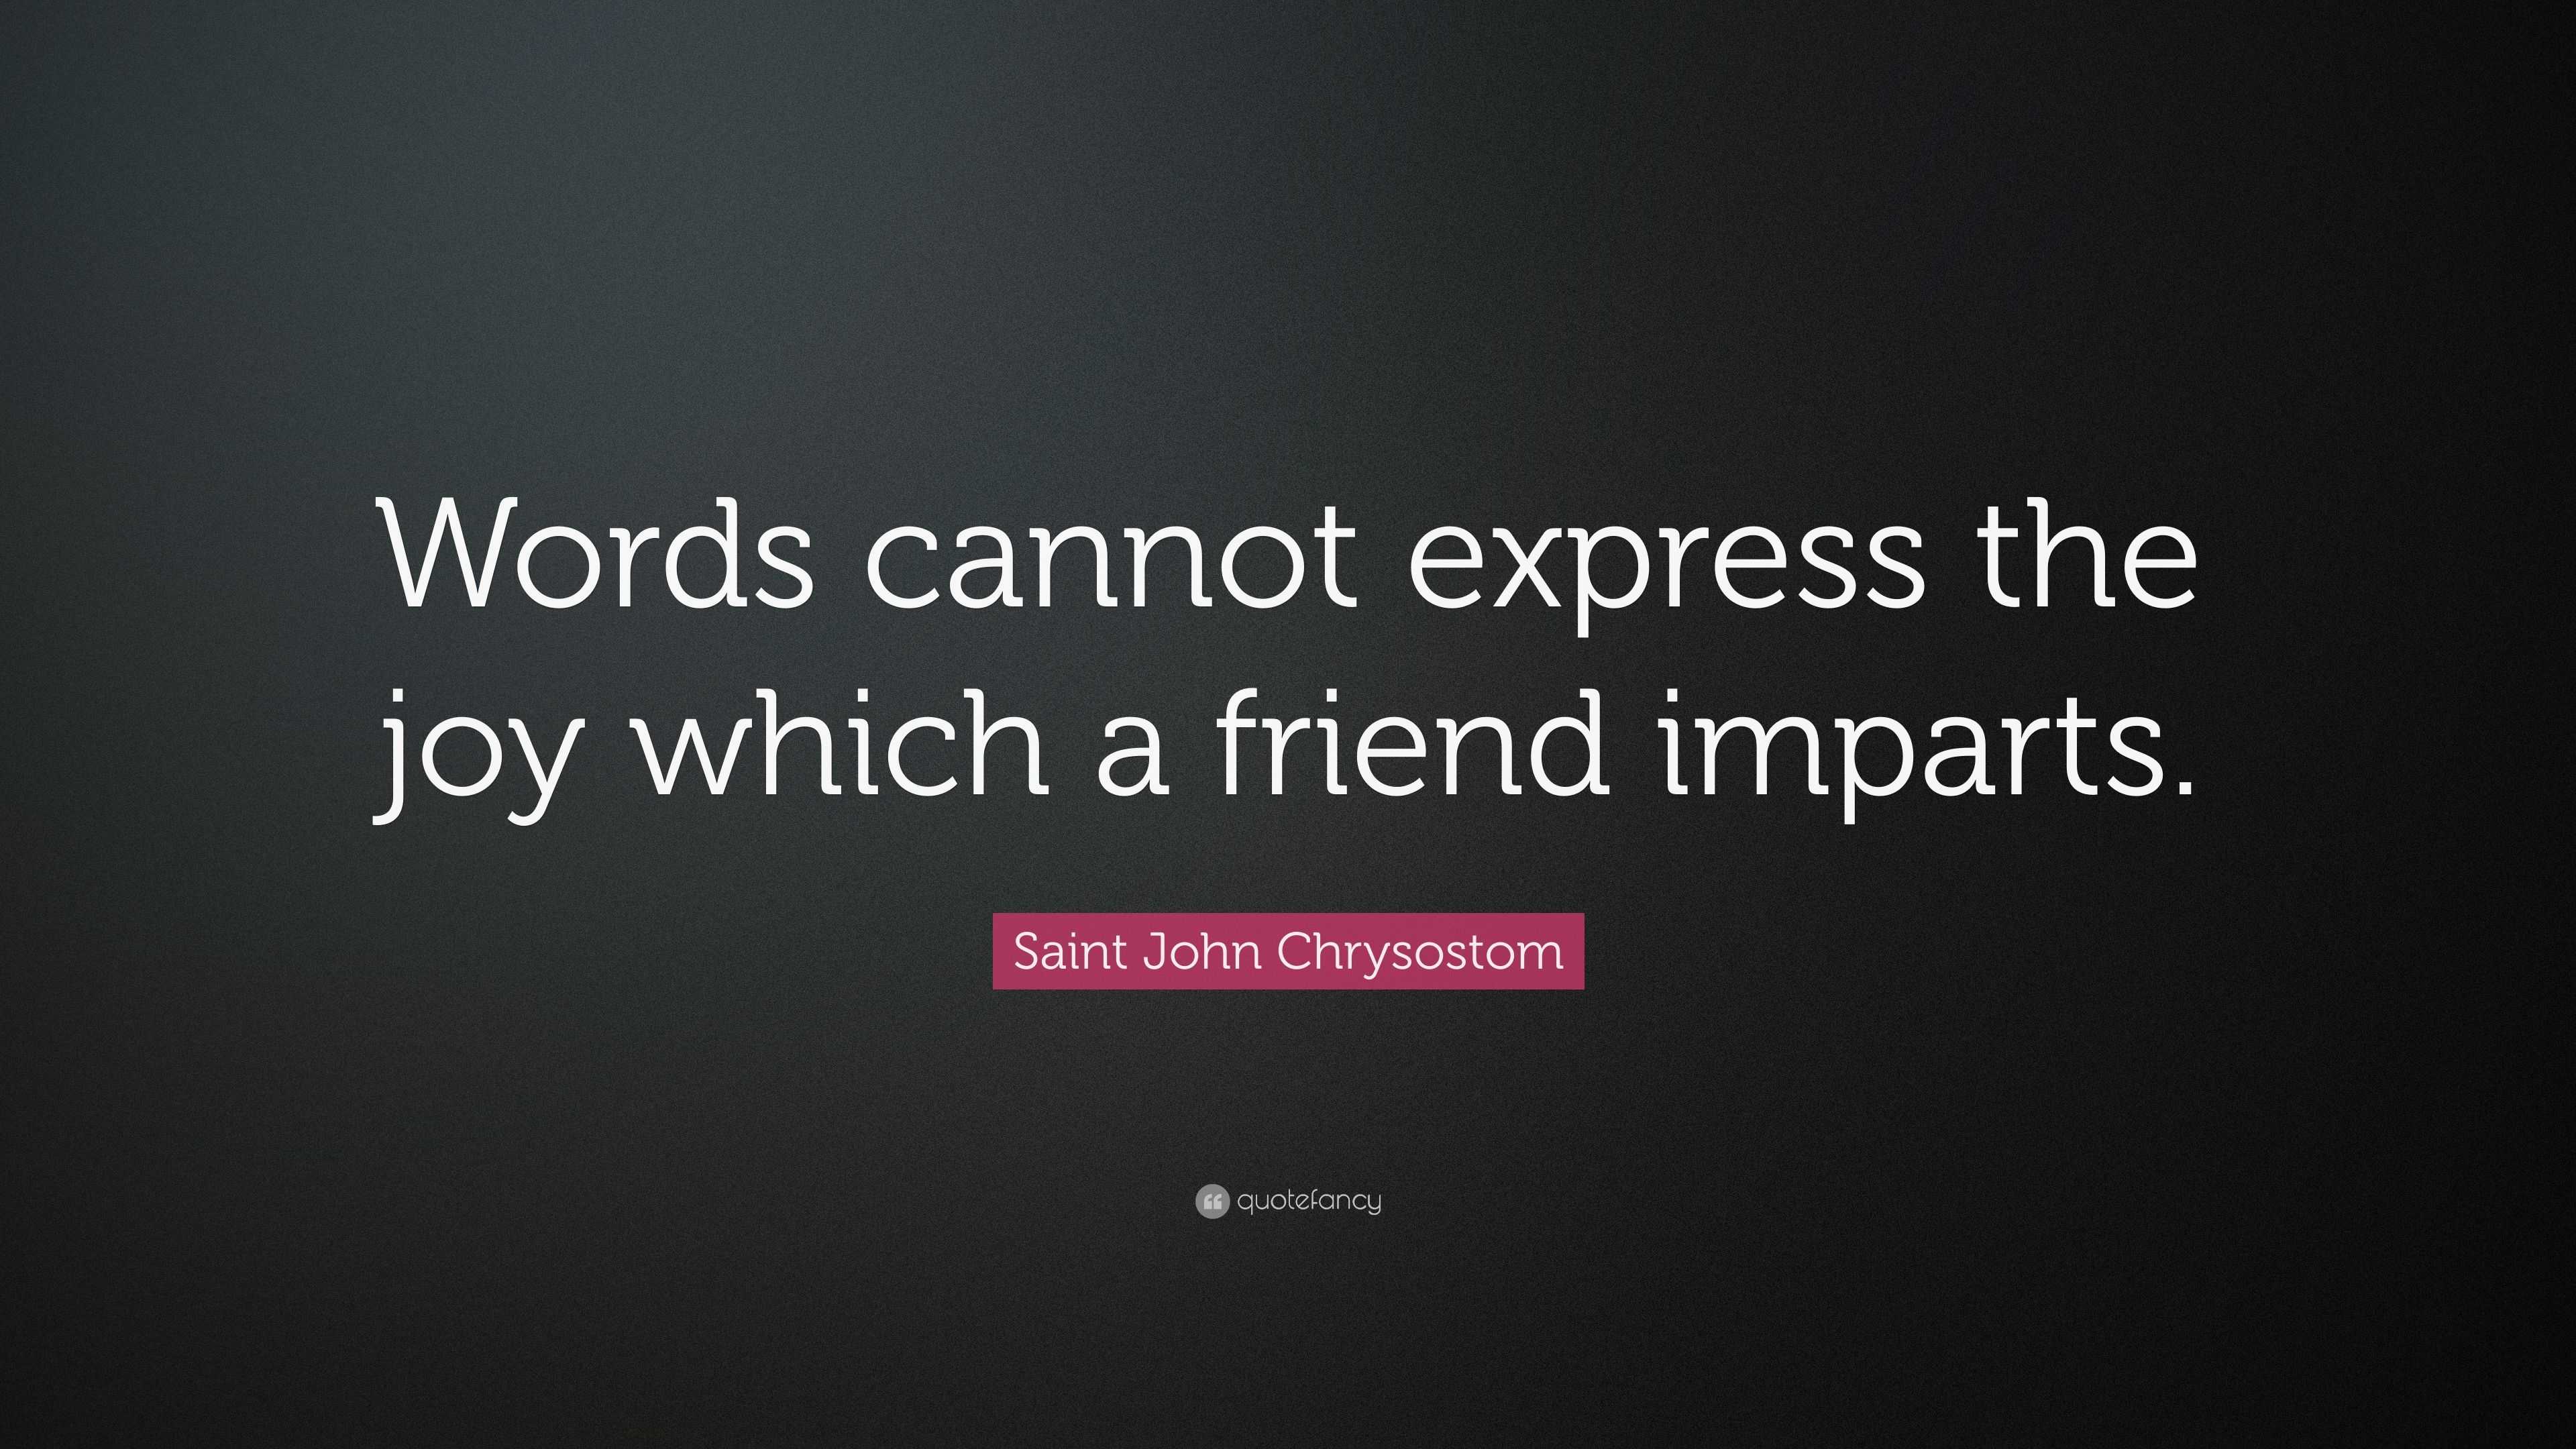 4415528 Saint John Chrysostom Quote Words cannot express the joy which a